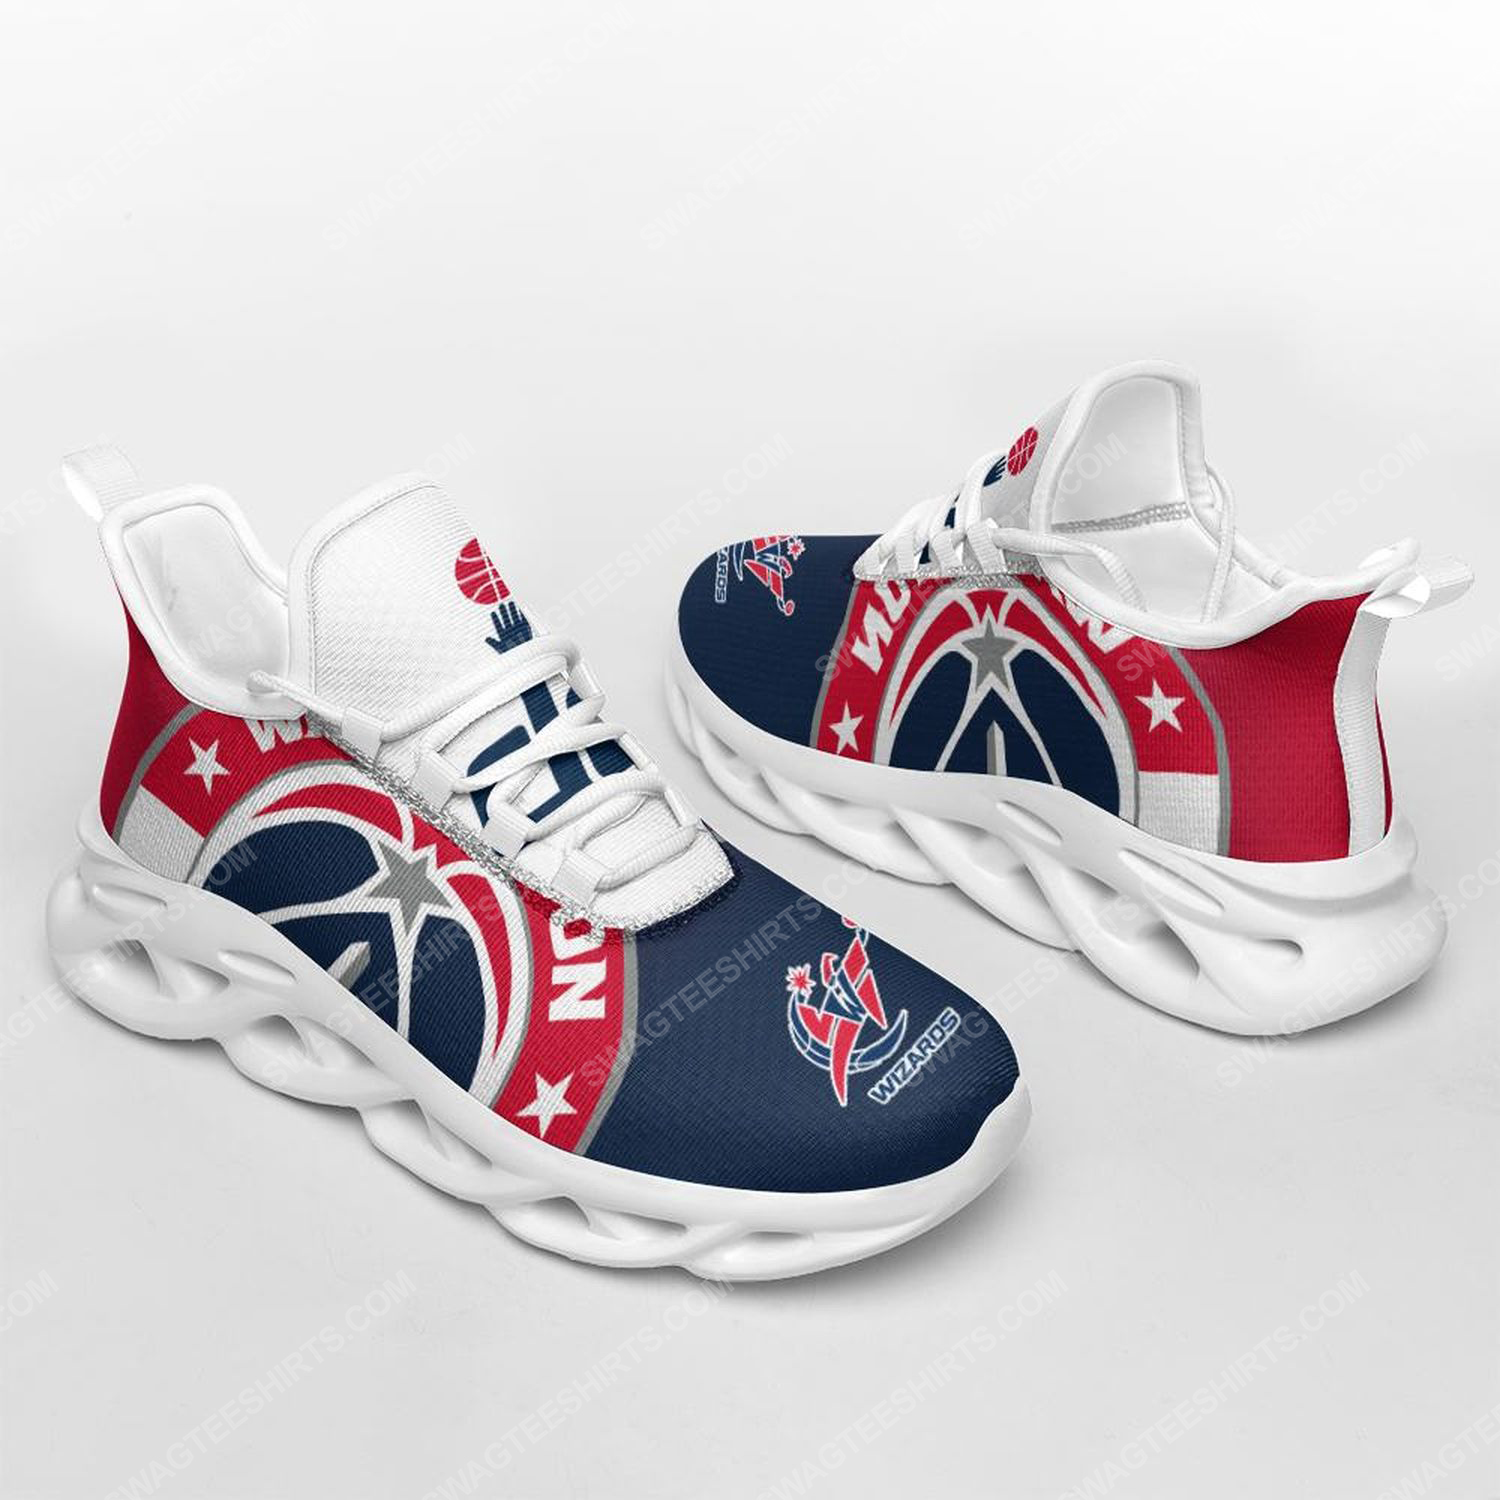 [special edition] The washington wizards basketball team max soul shoes – Maria